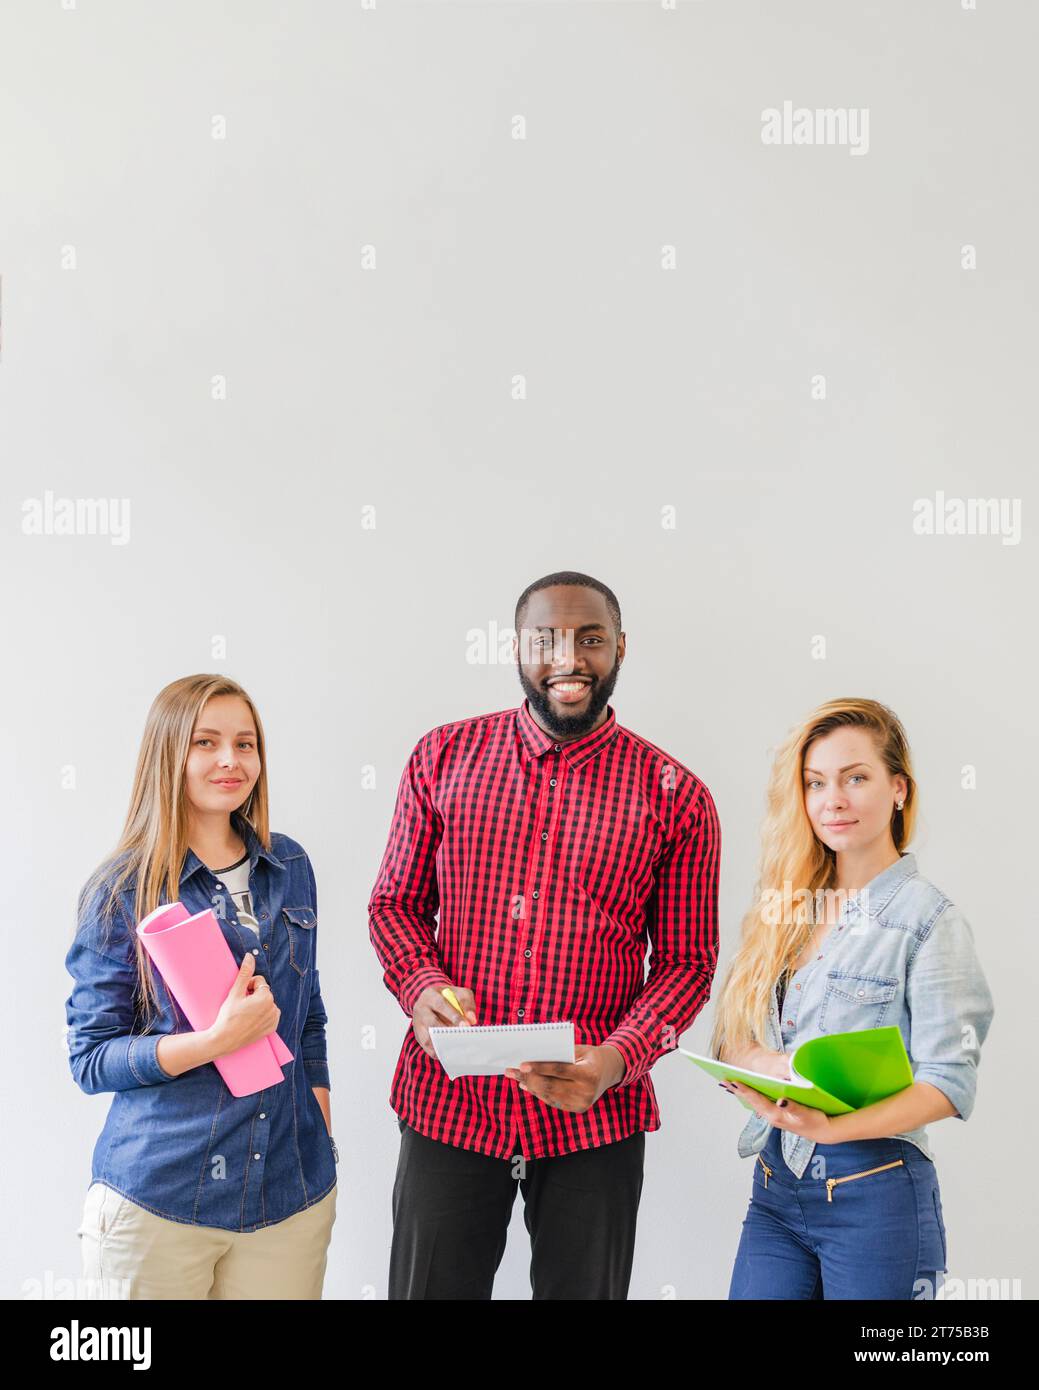 Successful students posing with notebooks Stock Photo